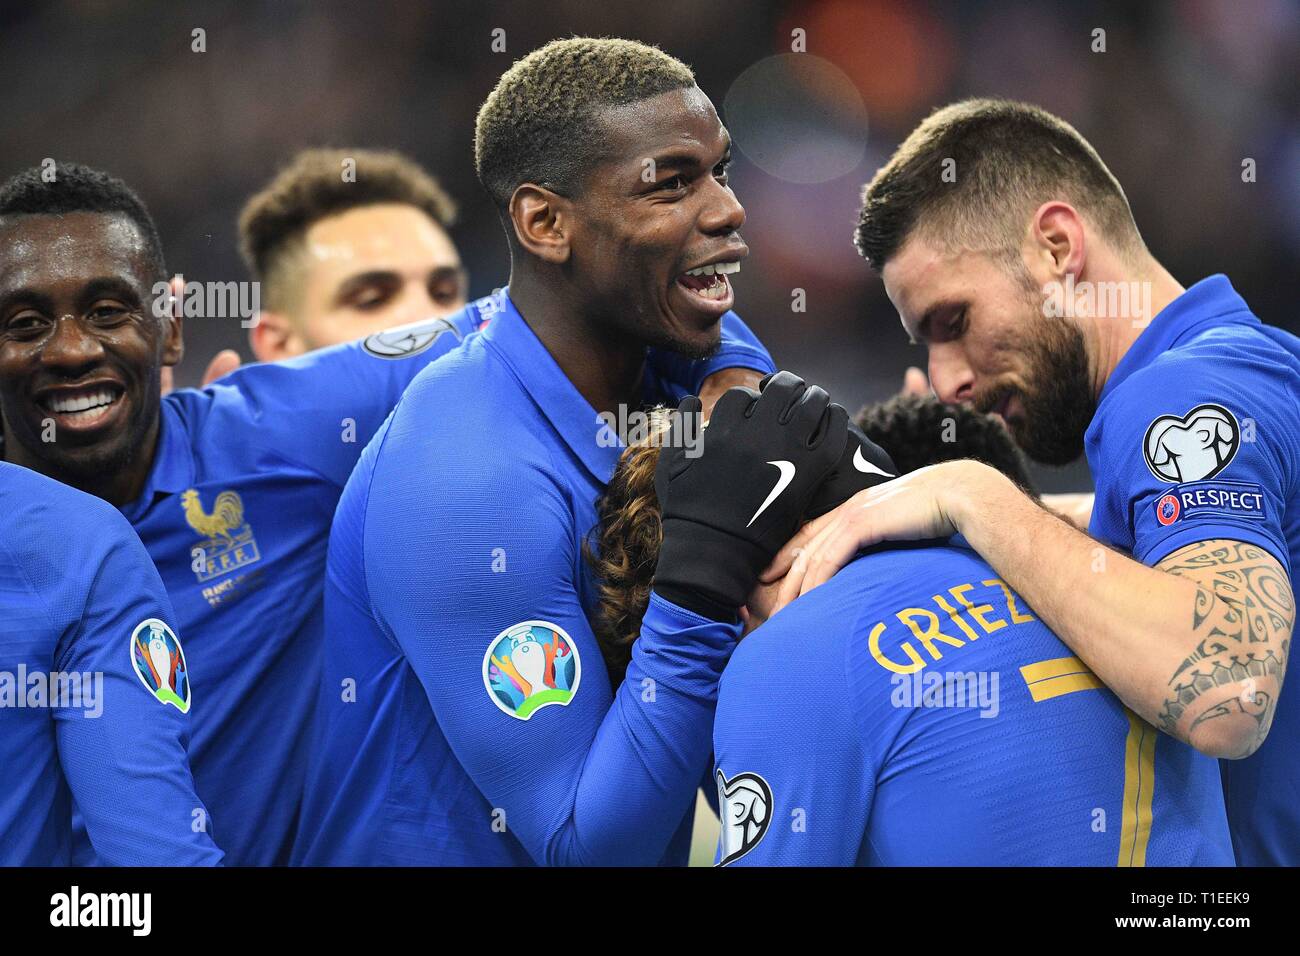 Paris, Paris. 25th Mar, 2019. Antoine Griezmann (2nd, R) of France  celebrates his goal with teammates during the UEFA Euro 2020 Group H  qualification match between France and Iceland in Saint-Denis, north